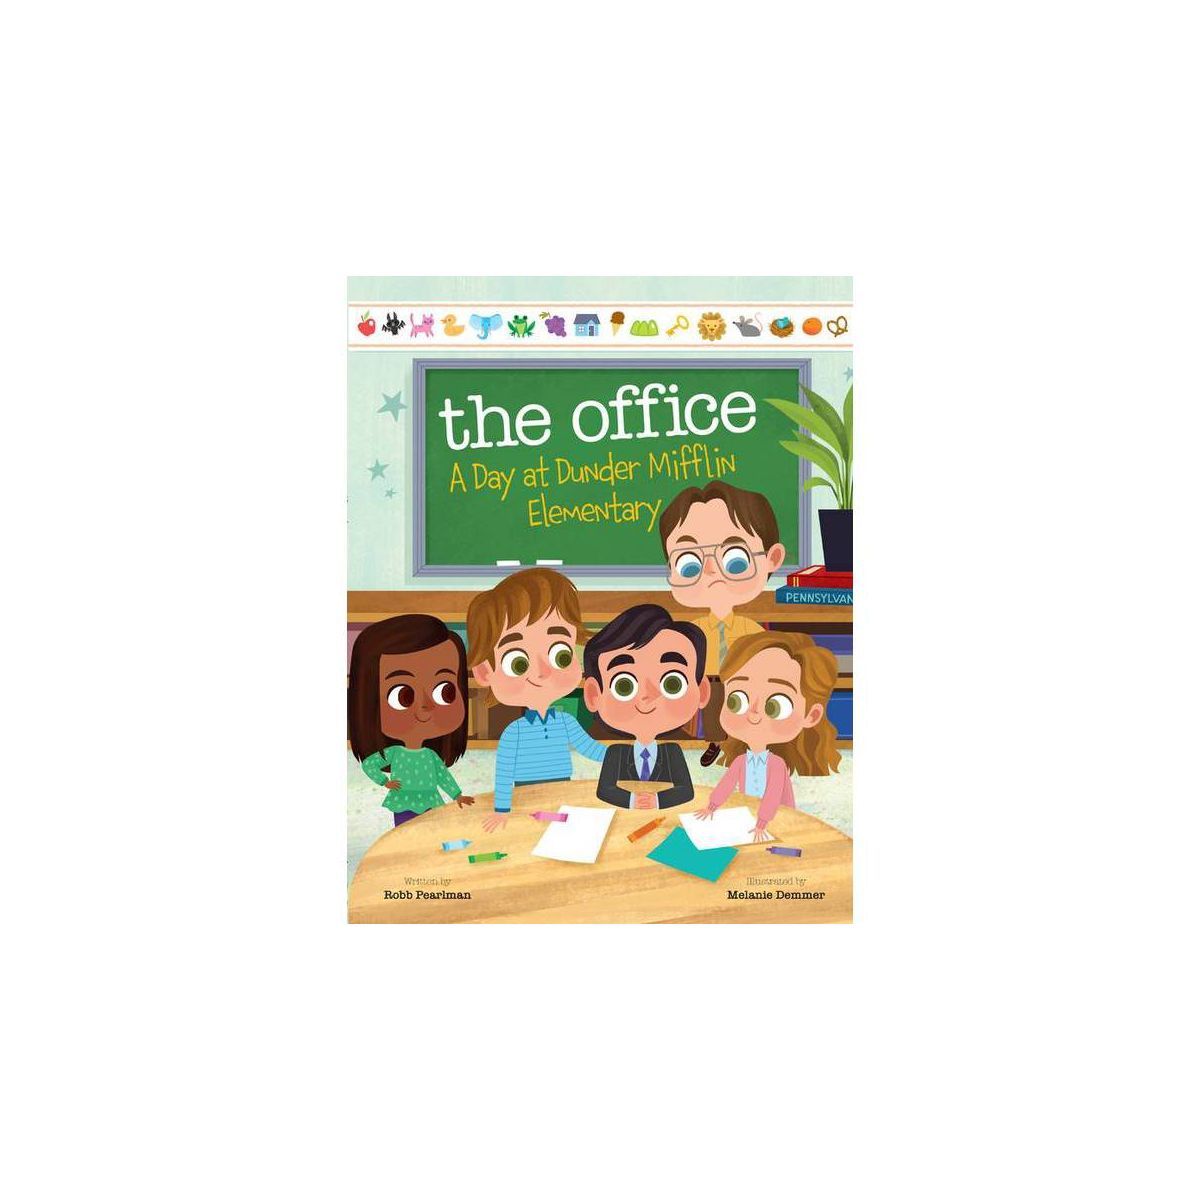 The Office: A Day at Dunder Mifflin Elementary - by Robb Pearlman (Hardcover) | Target